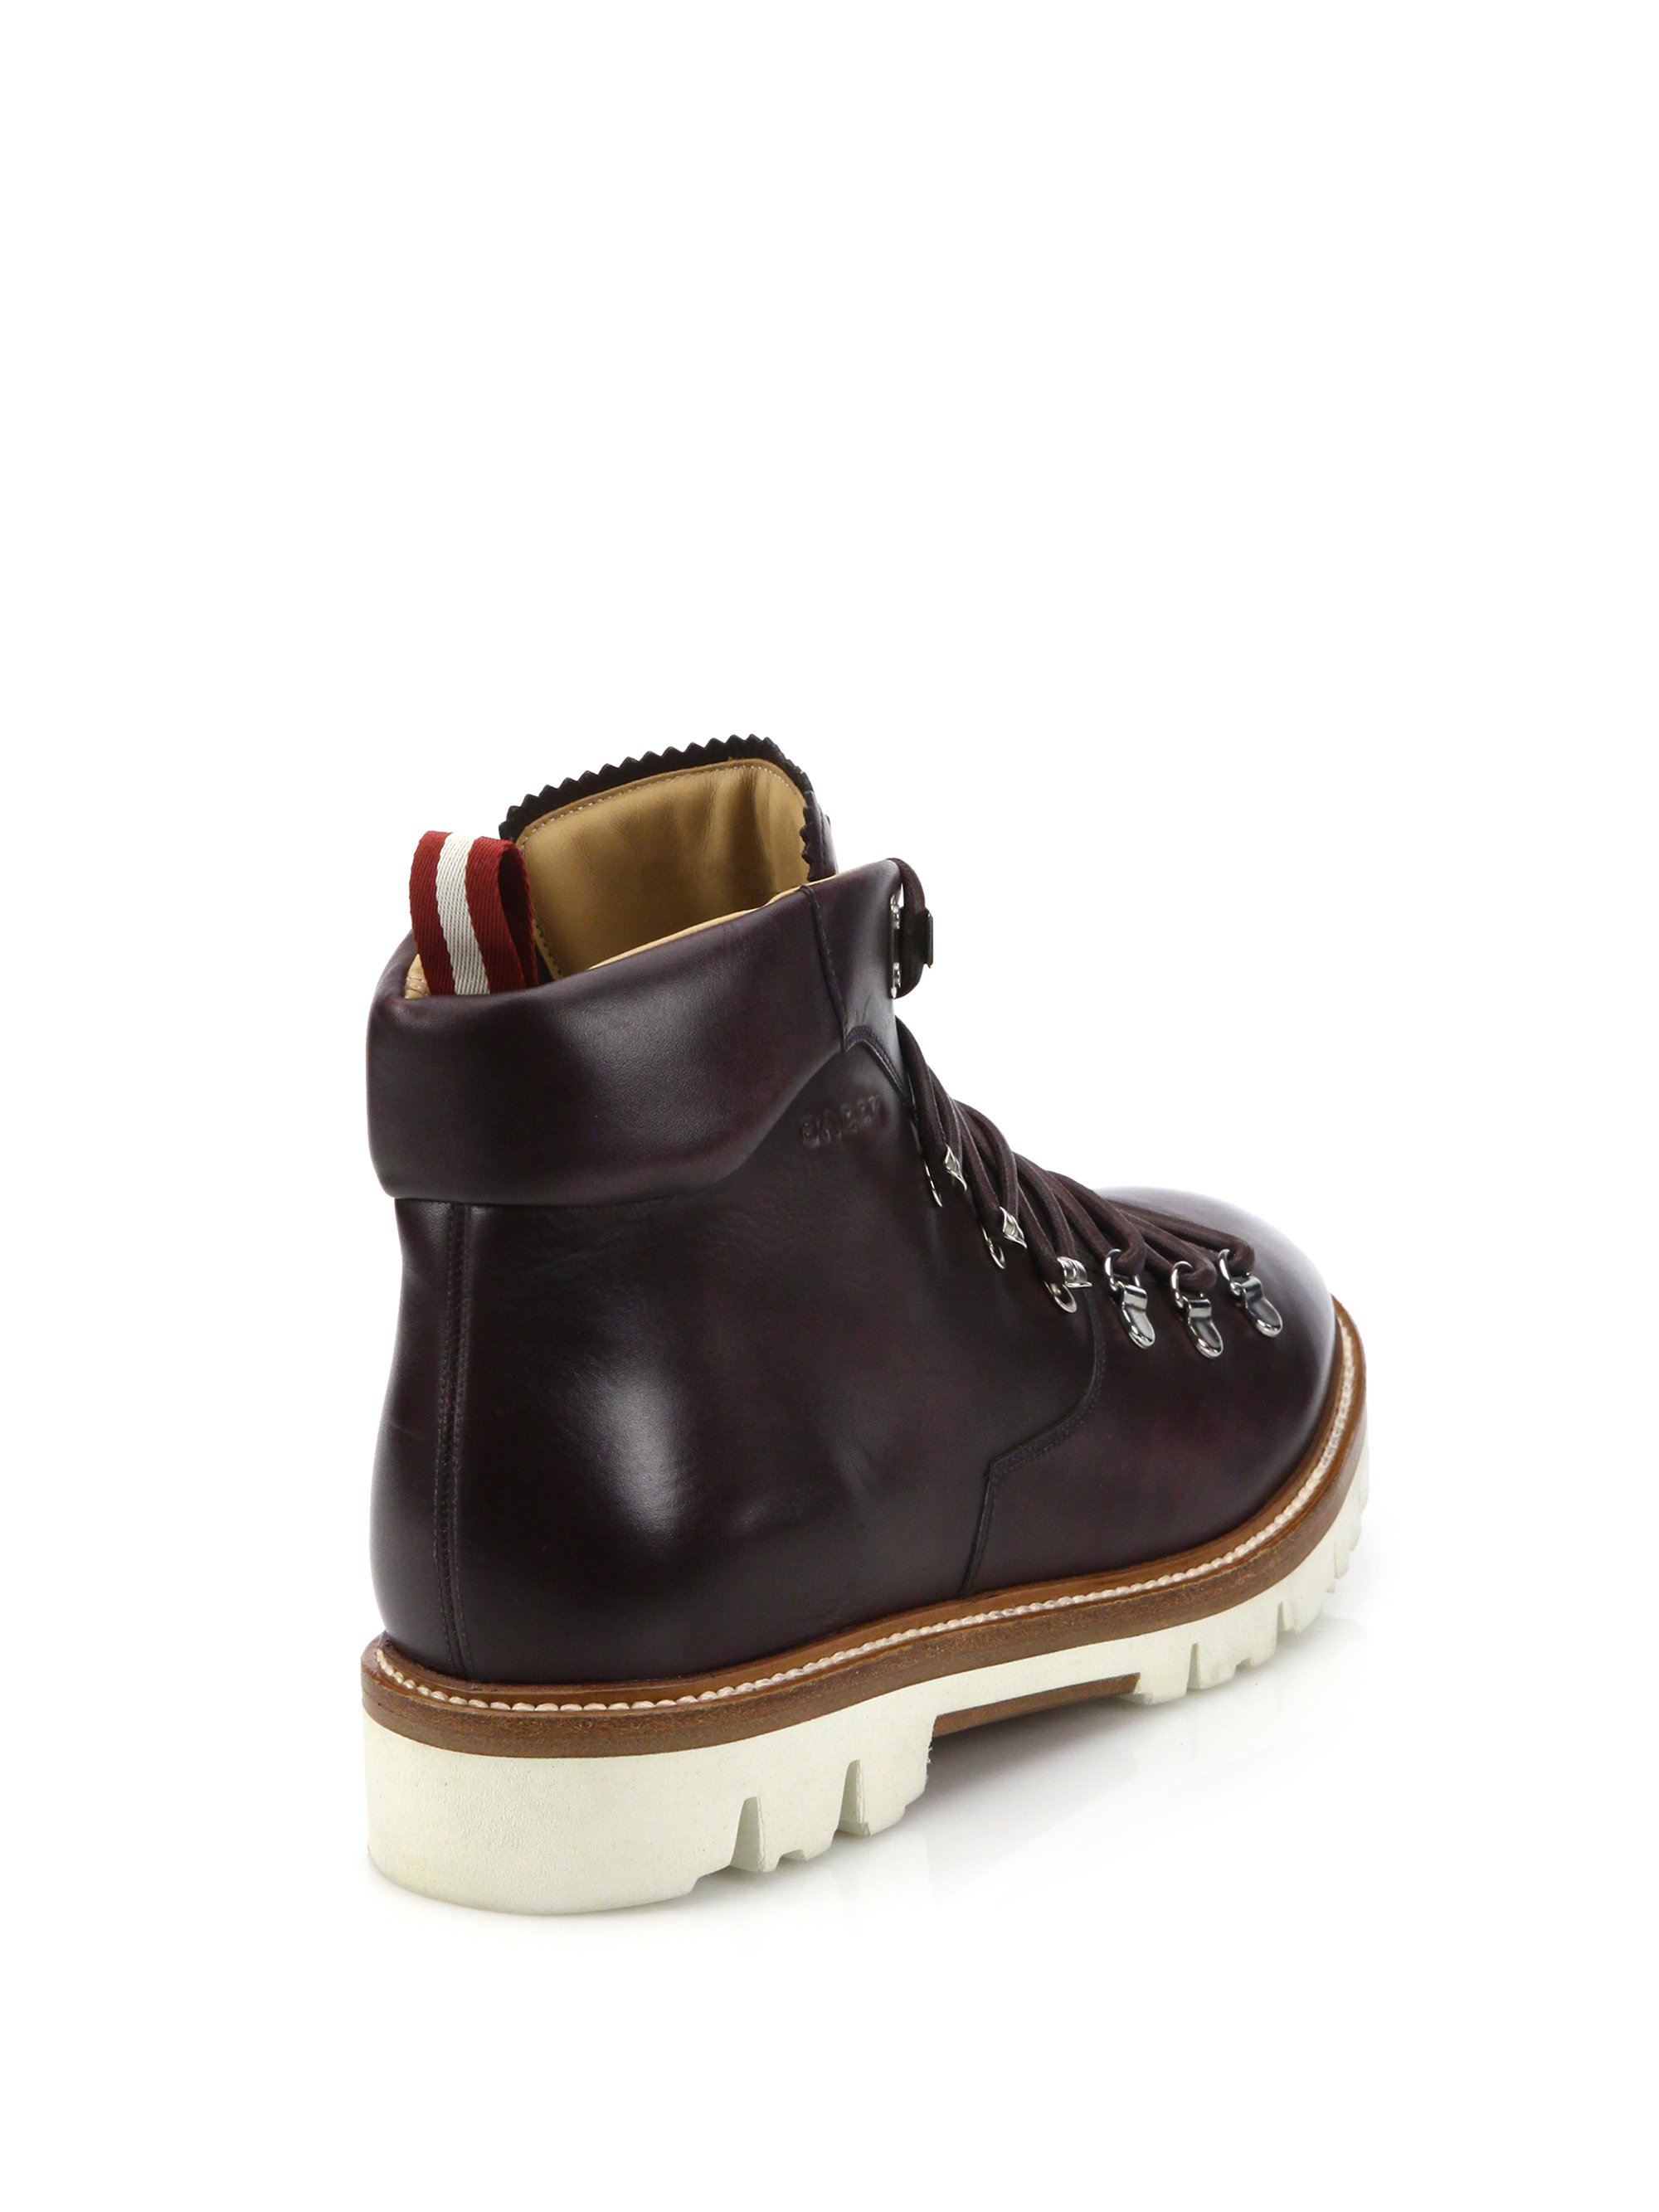 Lyst - Bally J. Cole For Leather Hiking Boots in Red for Men